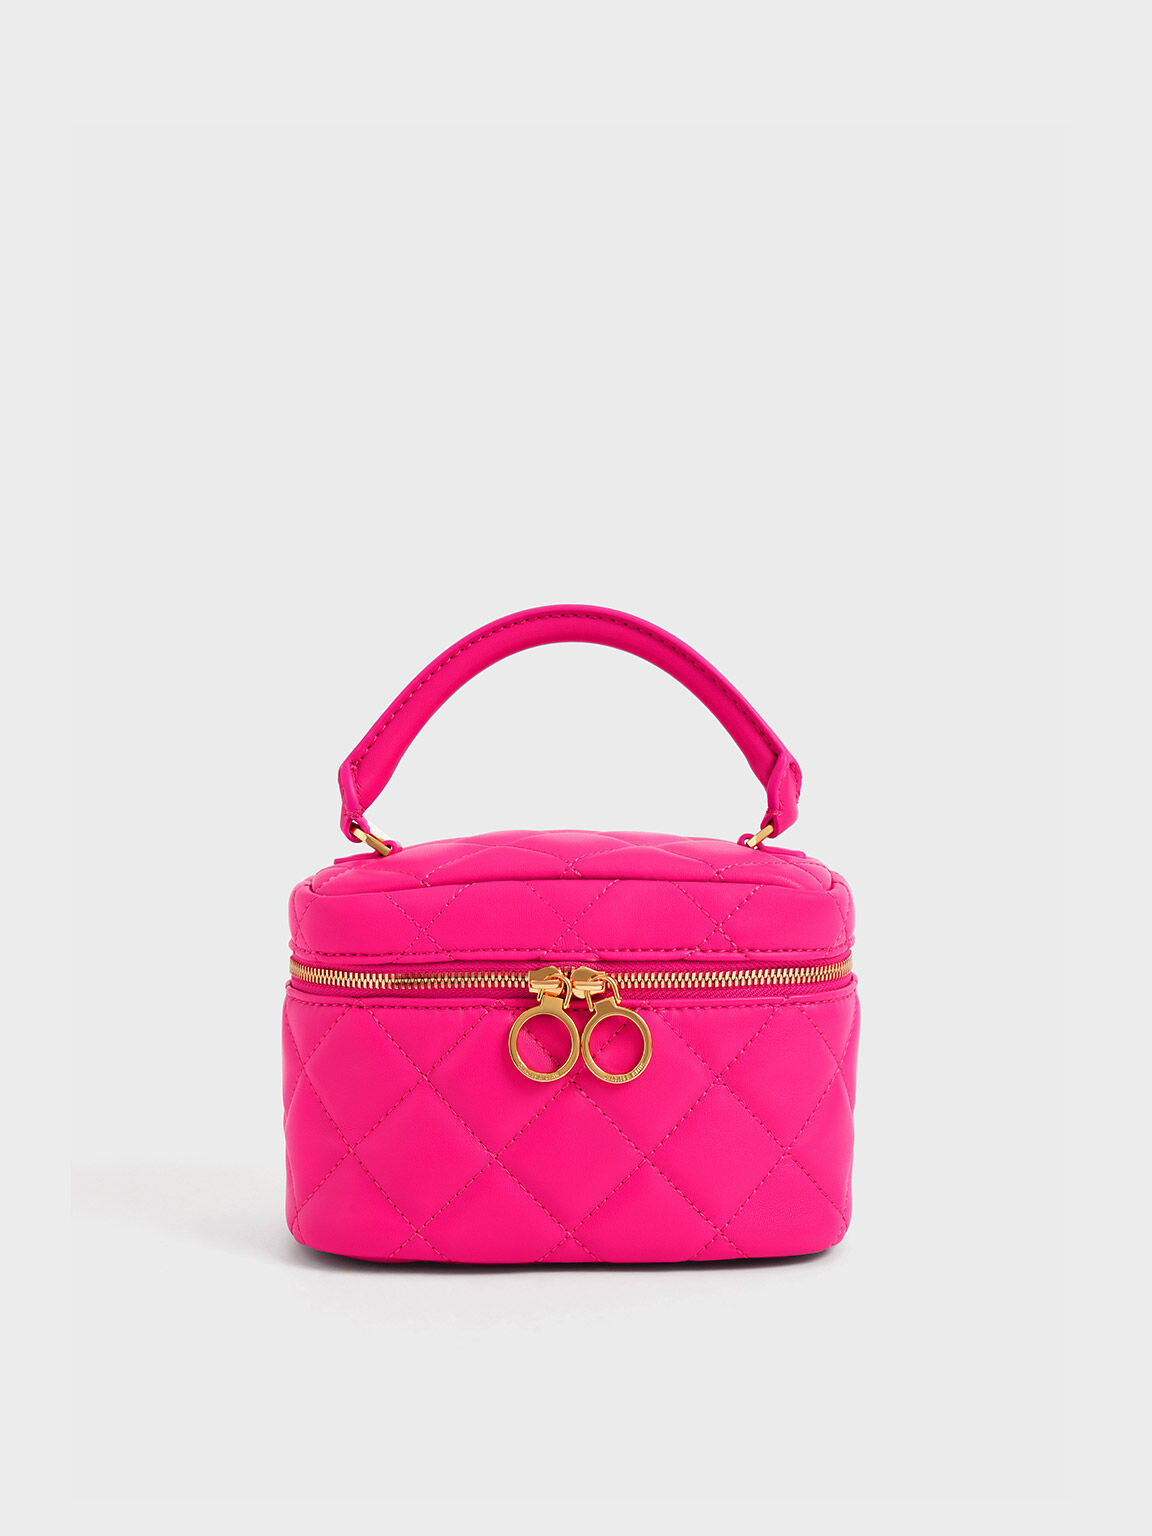 Handbags Polyurethane Ladies Pink PU Hand Bag, For Casual Wear, Size: 12x15  Inch at Rs 280/piece in New Delhi